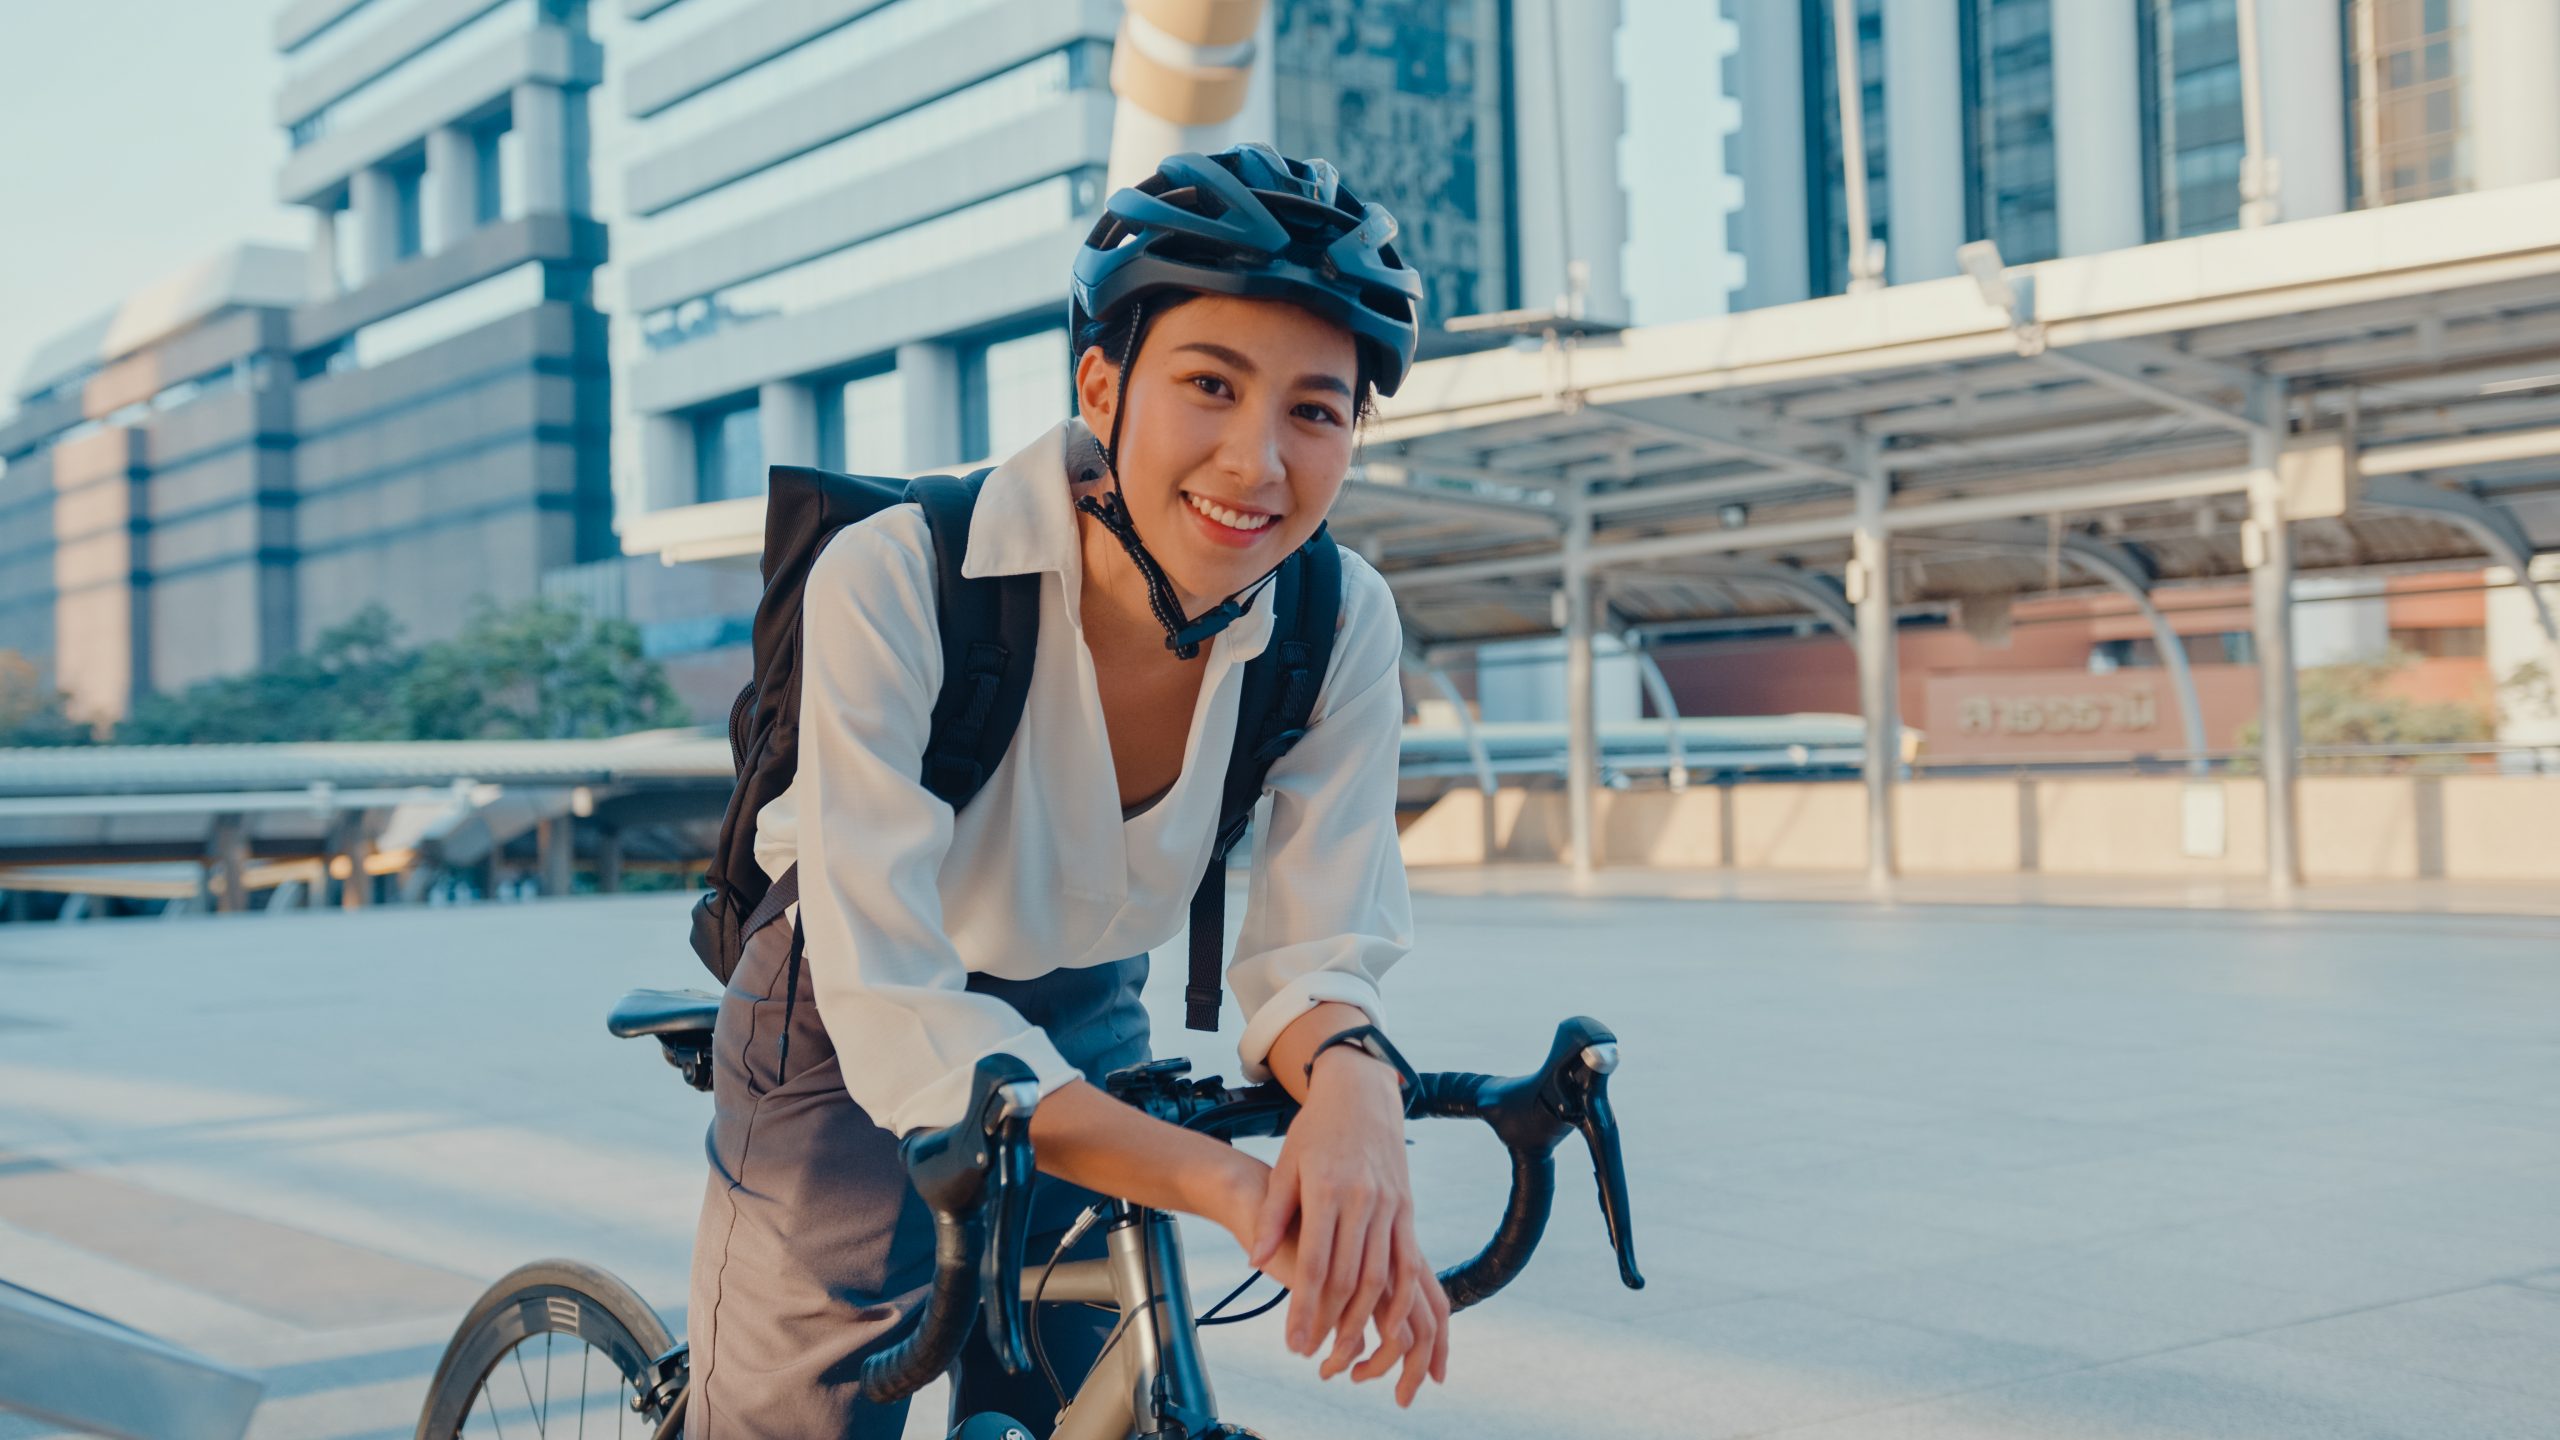 asian-businesswoman-go-to-work-at-office-stand-and-smiling-wear-backpack-look-at-camera-with-bicycle-on-street-around-building-on-a-city-bike-commuting-commute-on-bike-business-commuter-concept